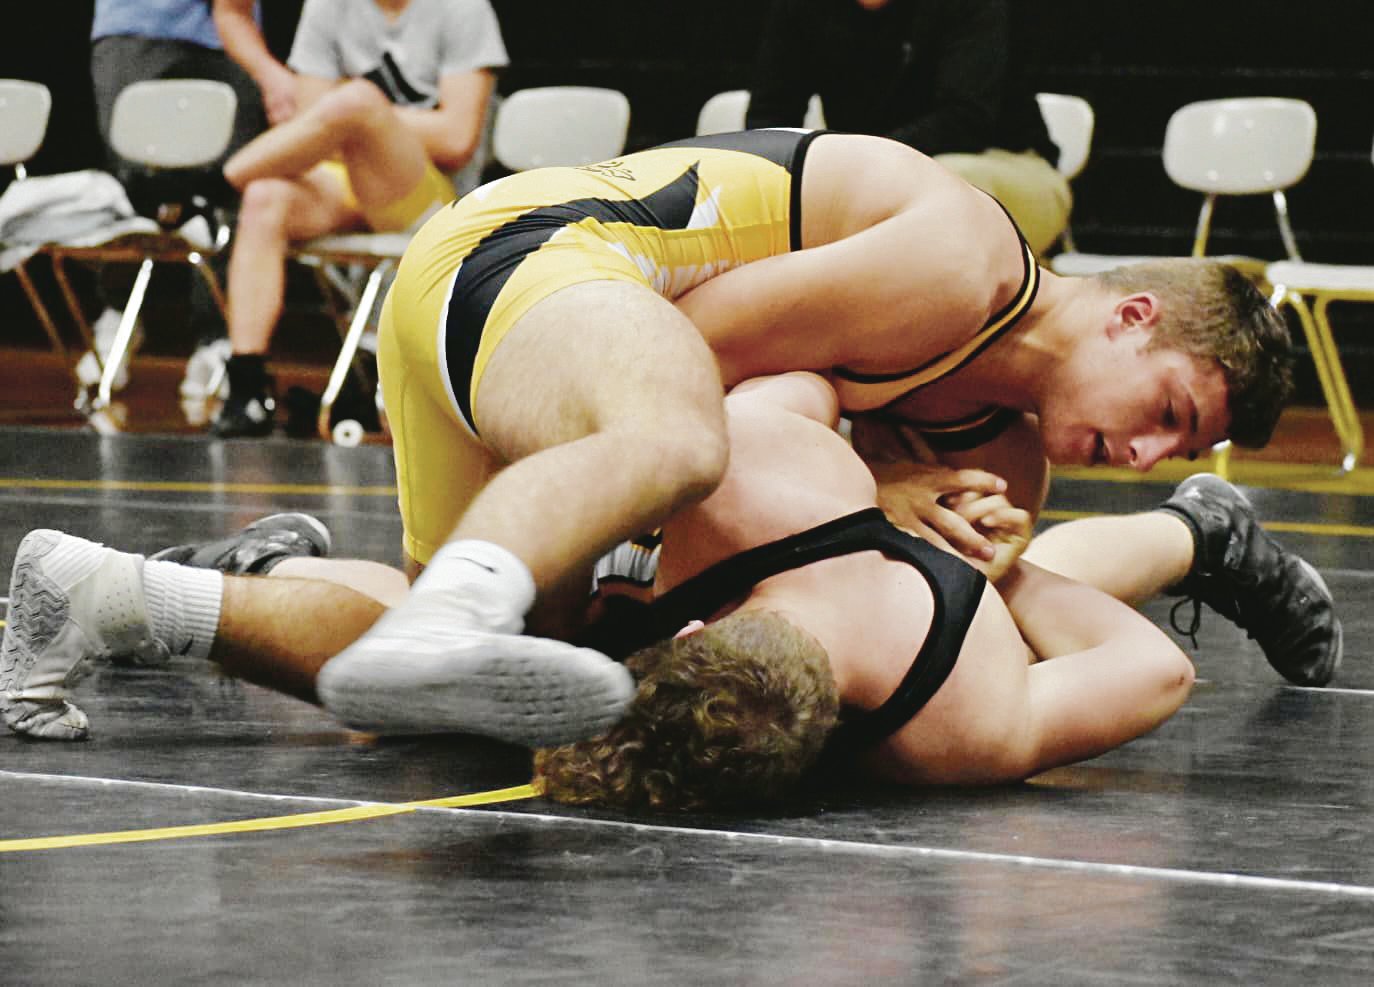 Photo by Nancy Smith
Lebanon junior Cade Muscia (top) looks to flip Ben Cooper to his back during a Black and Gold wrestling scrimmage on Tuesday night at the LHS Wrestling Fieldhouse.